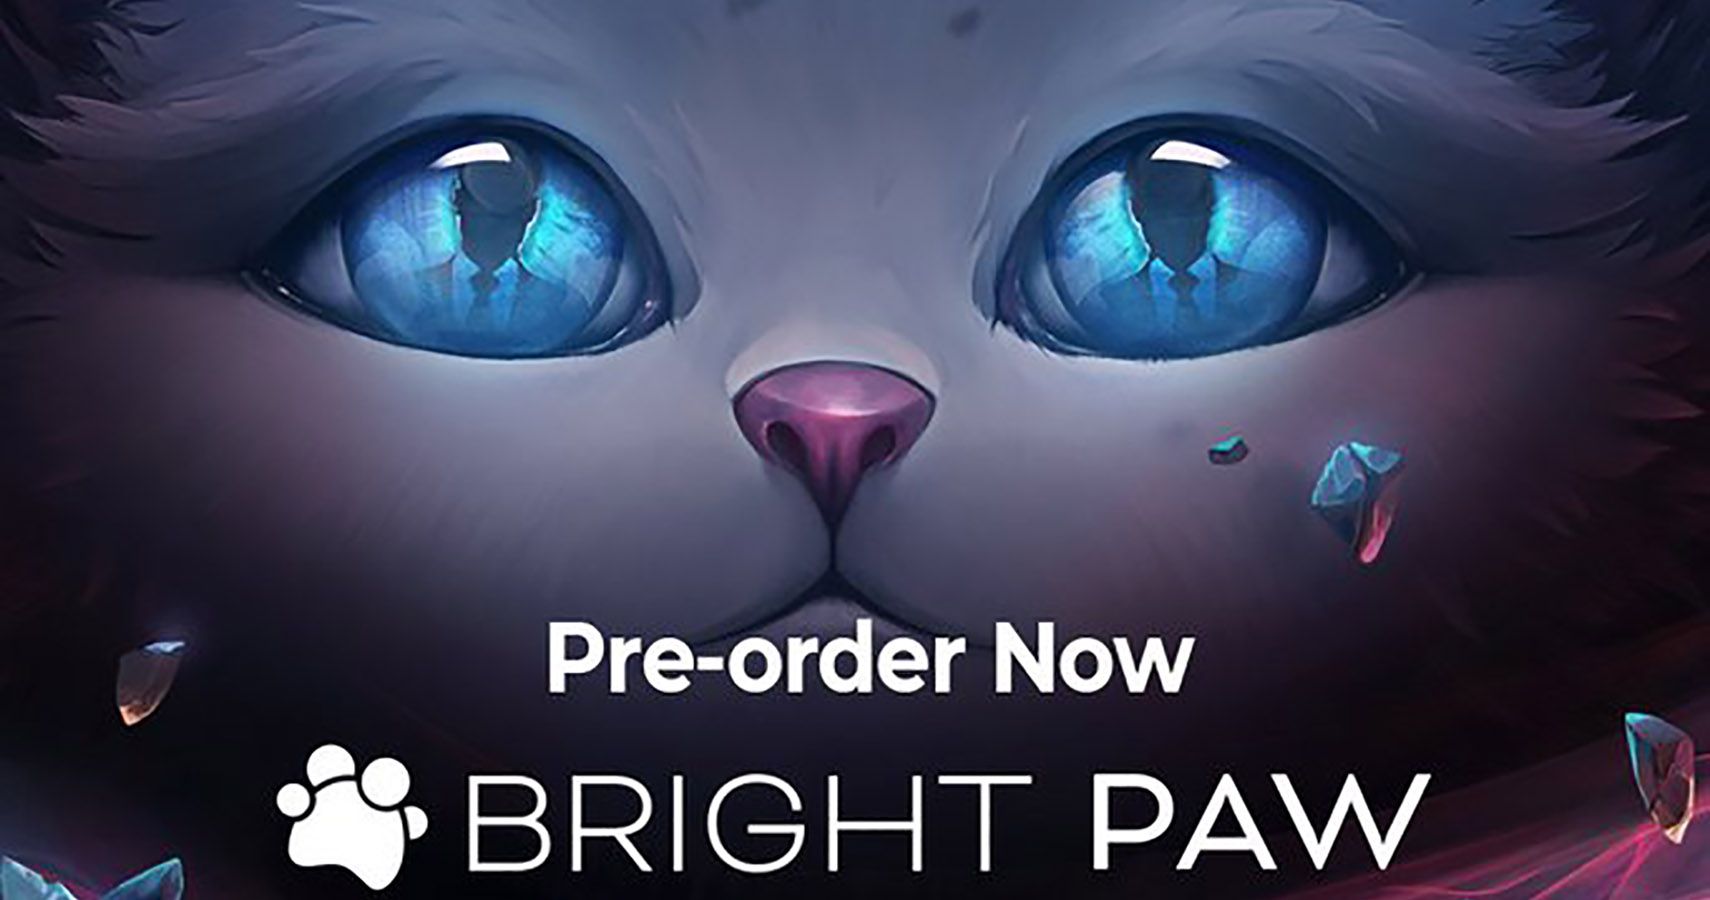 Bright Paw is available now for the switch.